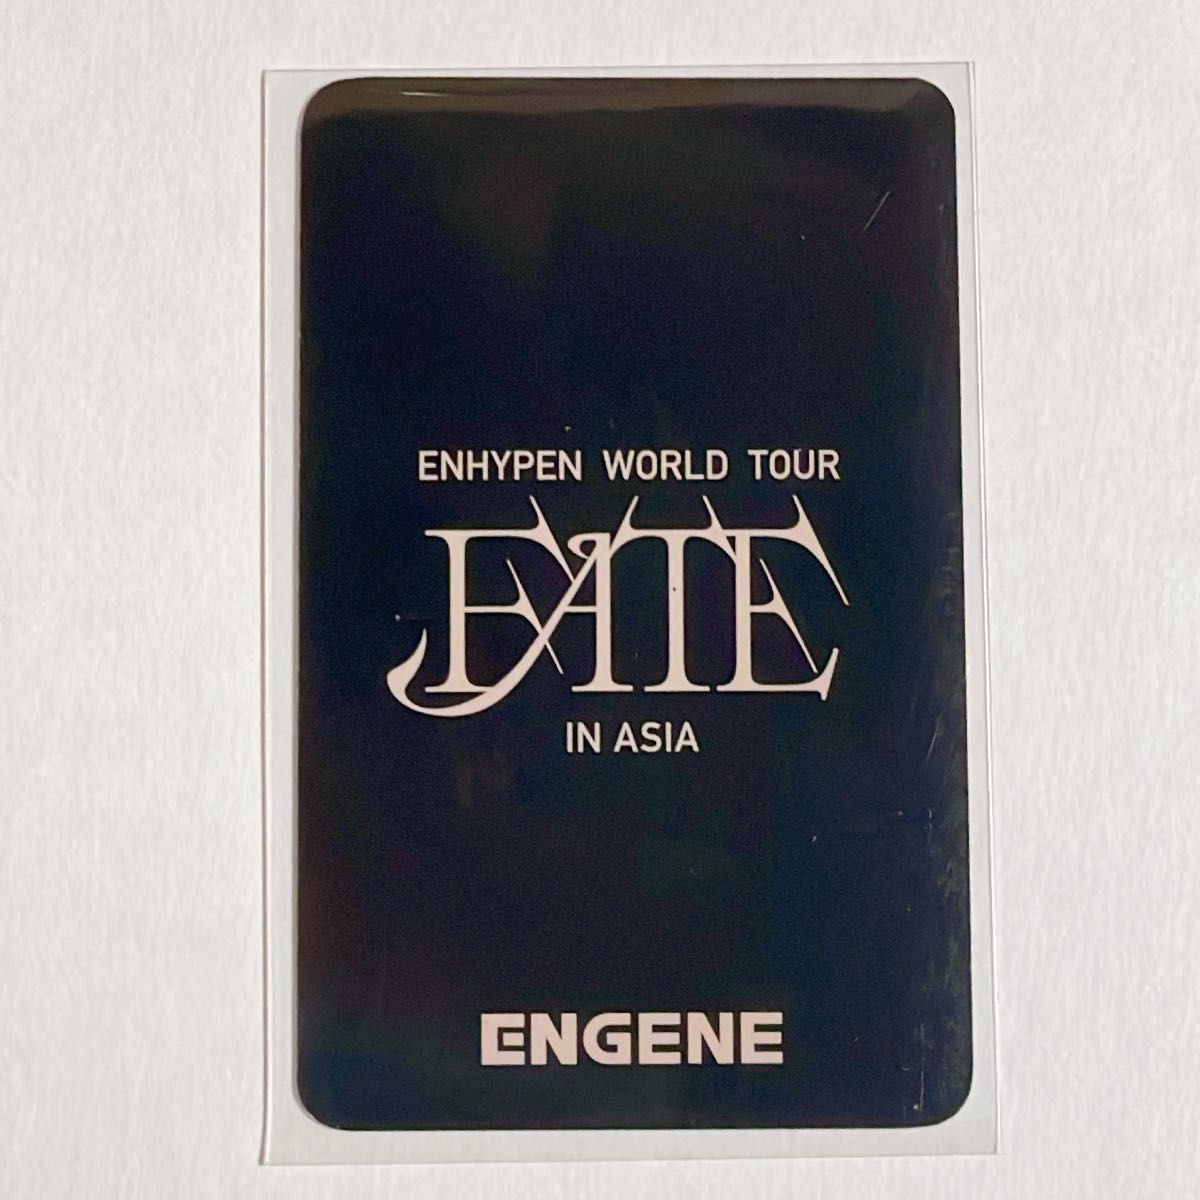 ENHYPEN WORLD TOUR FATE IN ASIA マカオ ヒスン FCトレカ